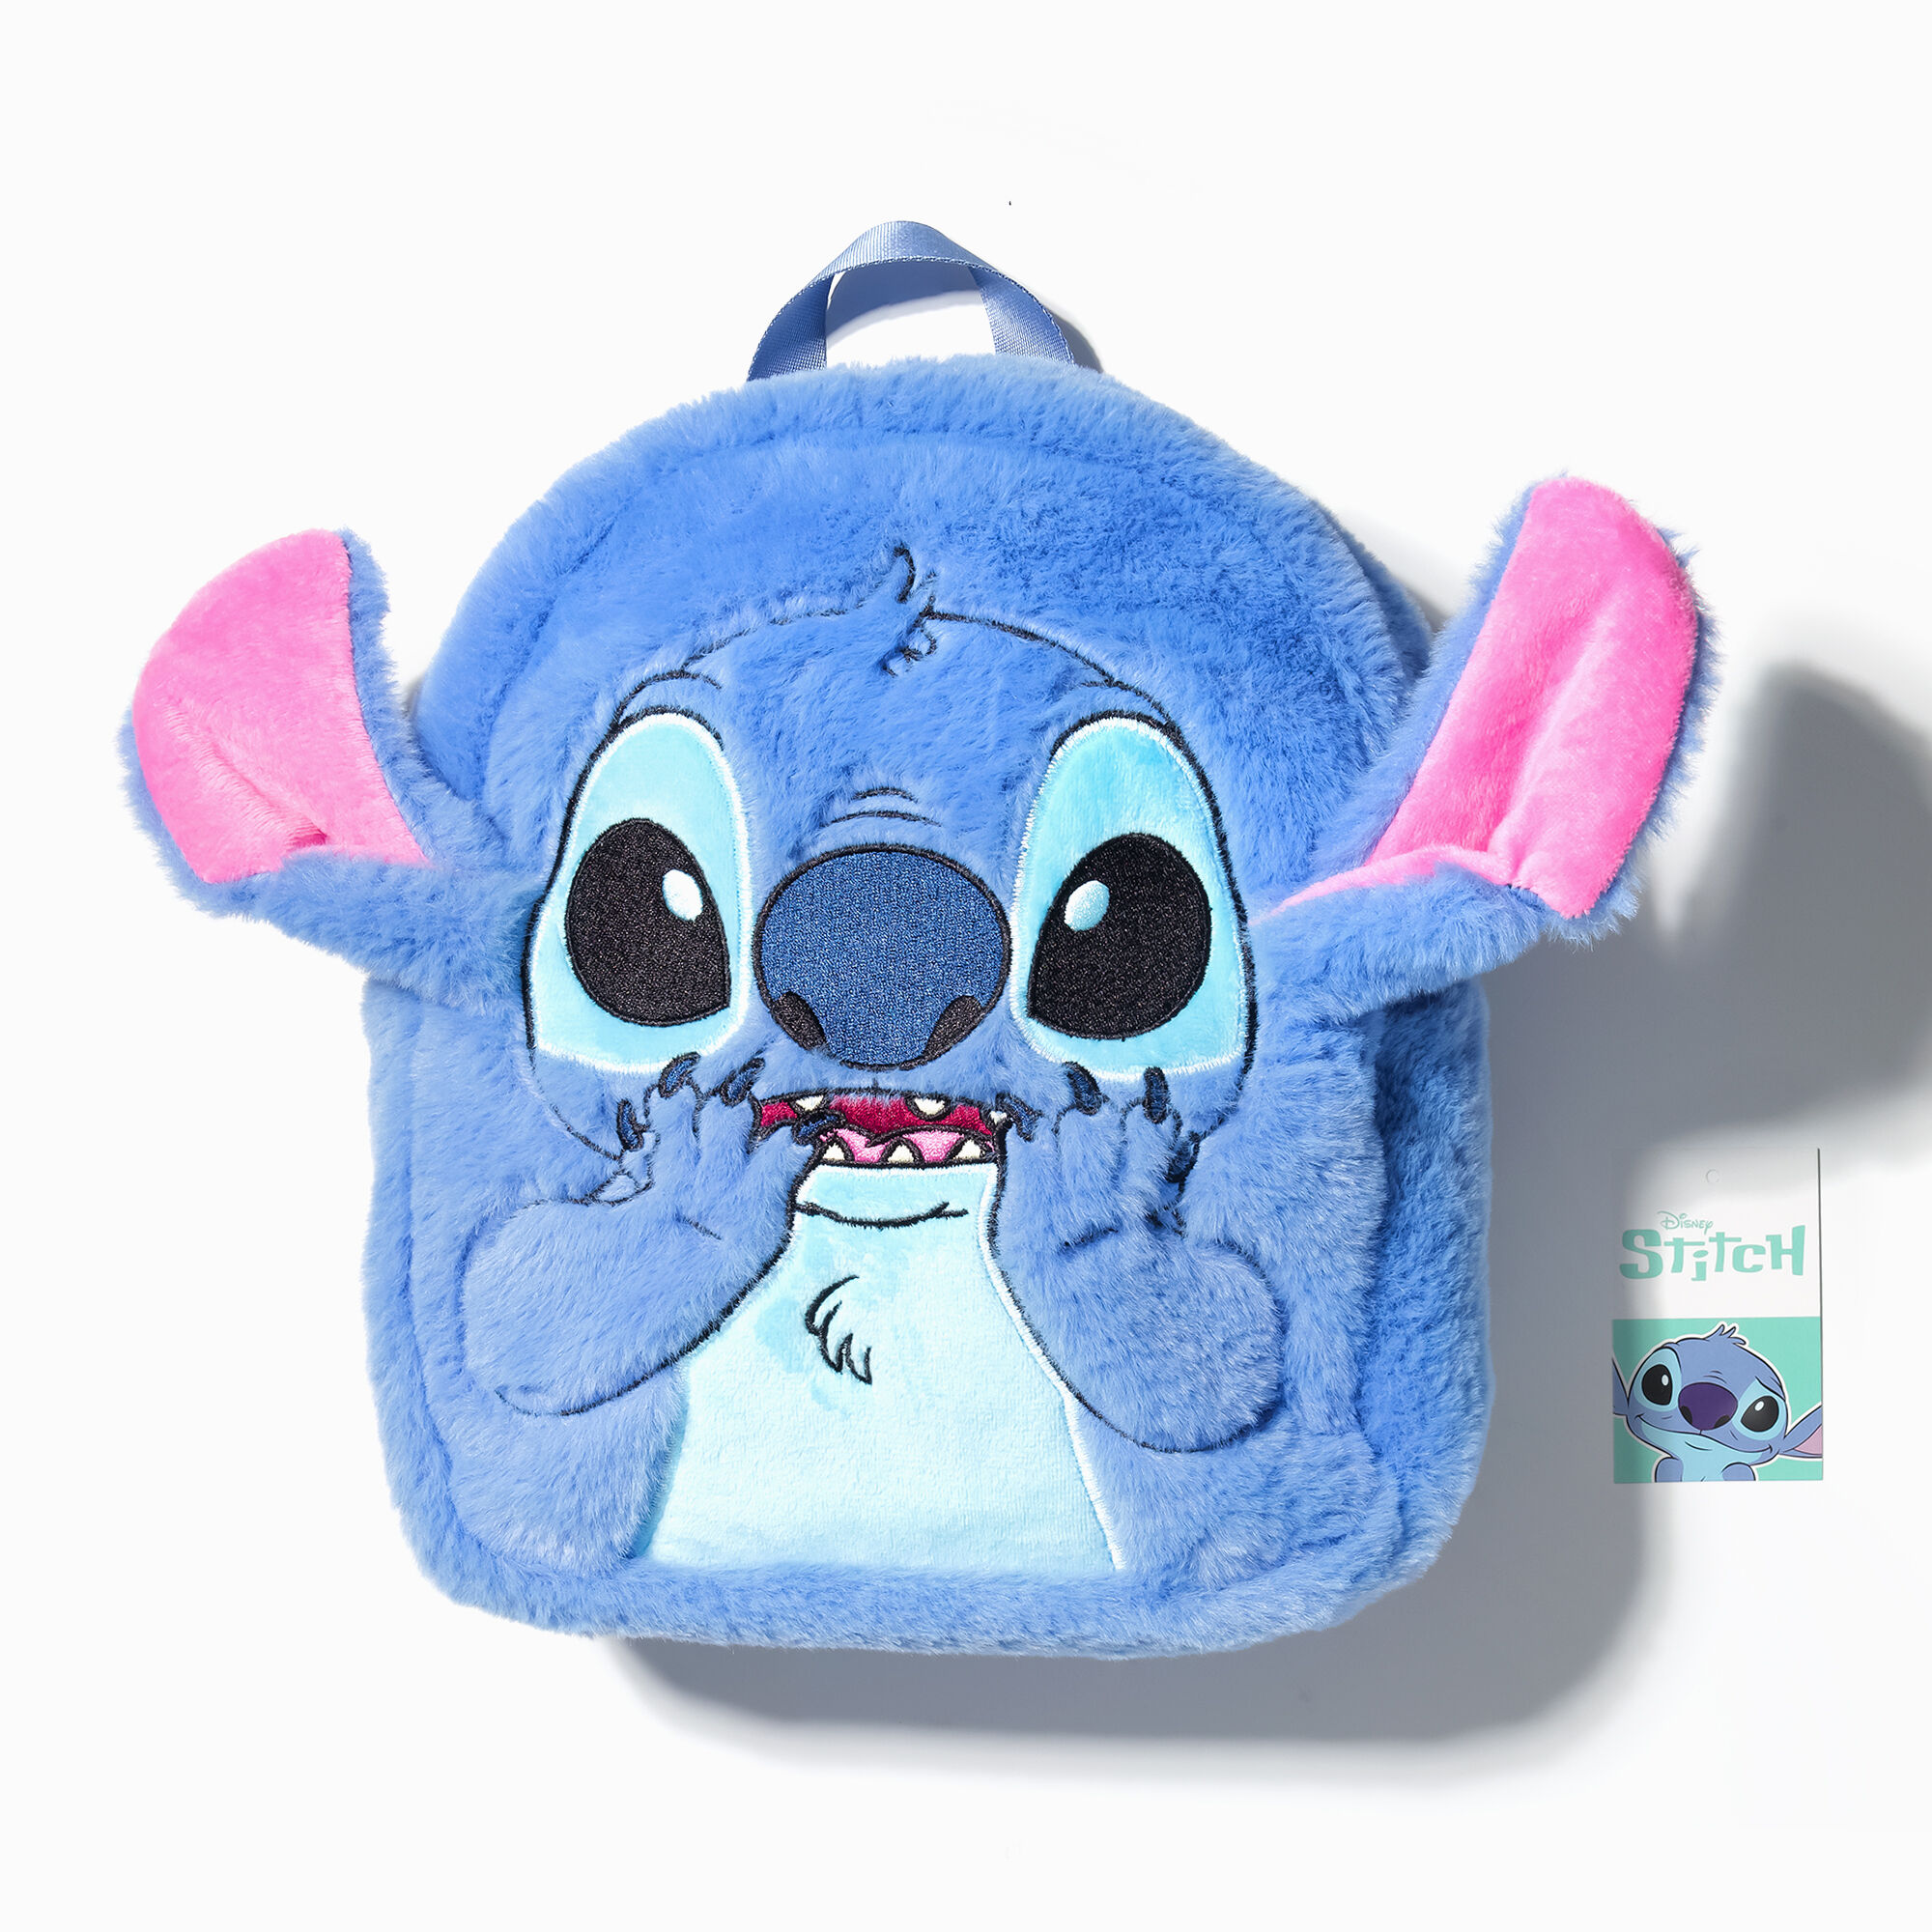 View Claires Disney Stitch Soft Mini Backpack Pink information